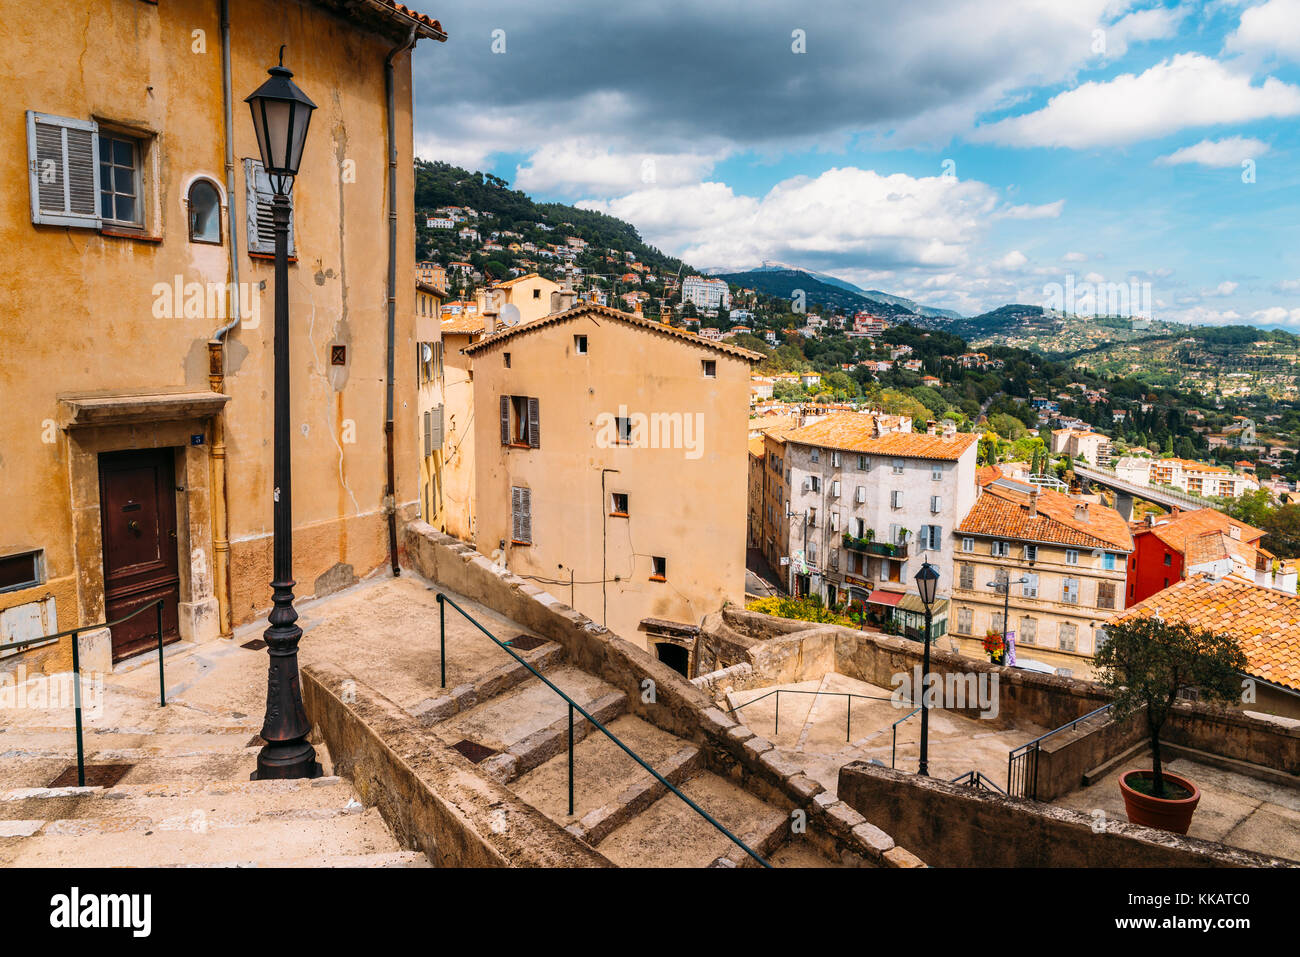 Winding stairs in Grasse, Alpes Maritimes, Cote d'Azur, Provence, French Riviera, France, Europe Stock Photo